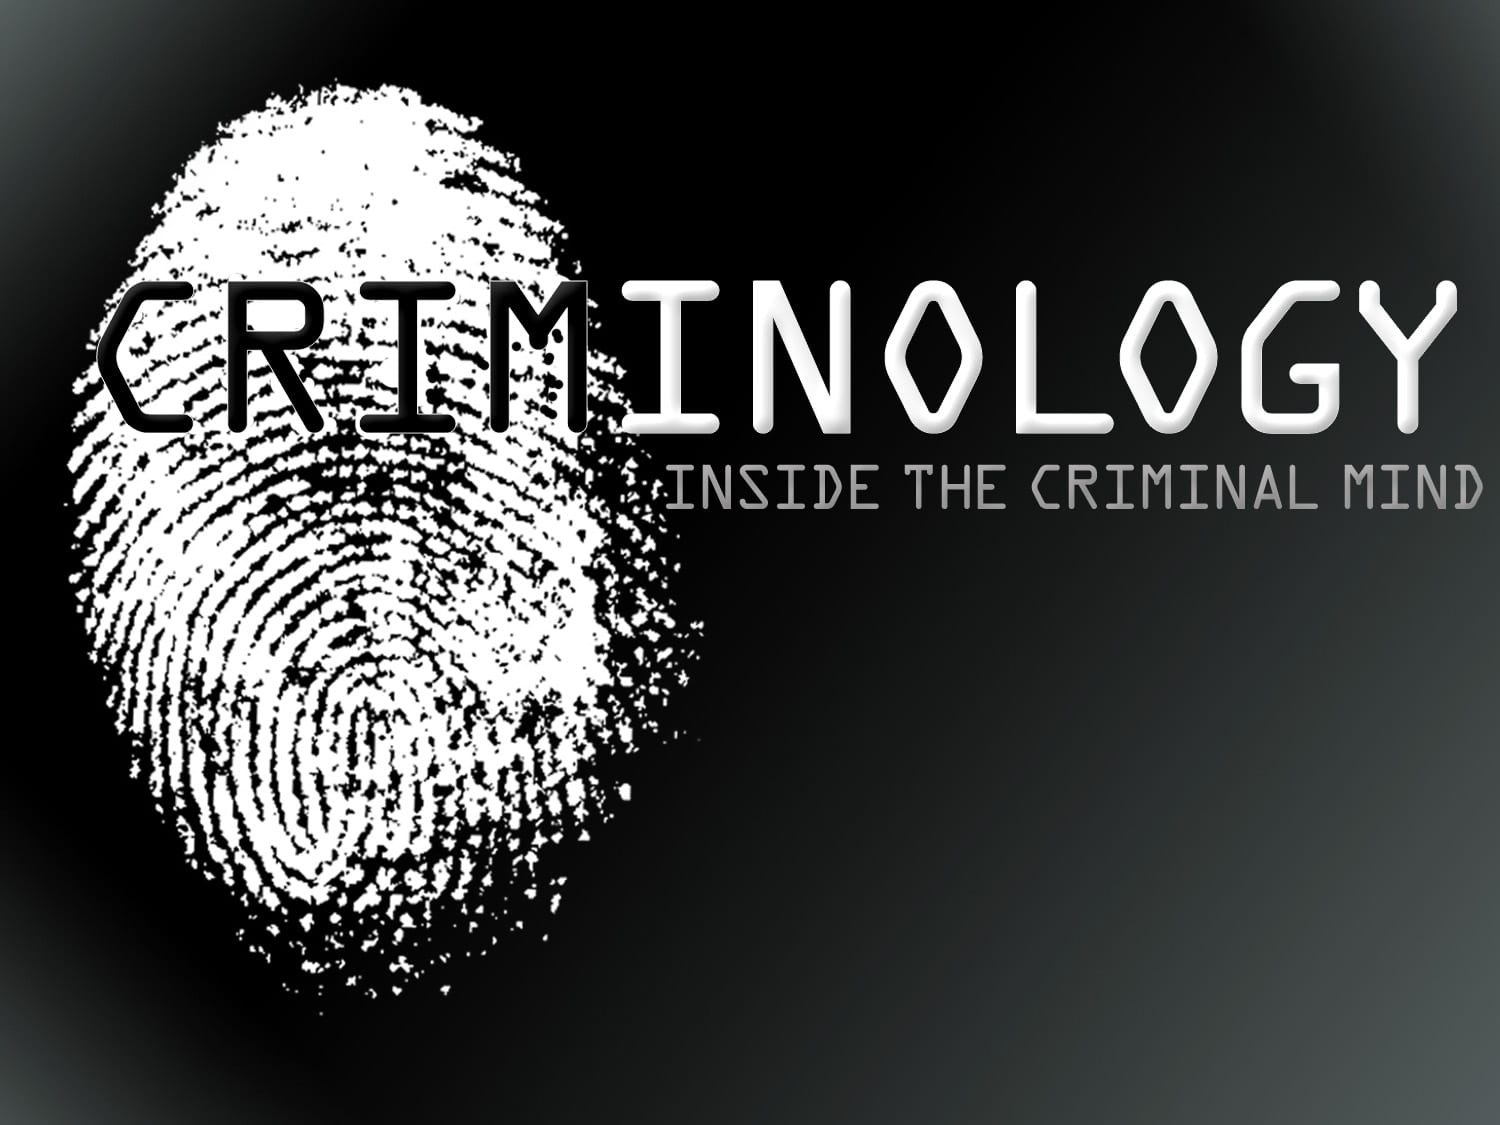 4 best subjects to get into a criminology occupation!- my top 4 tips!